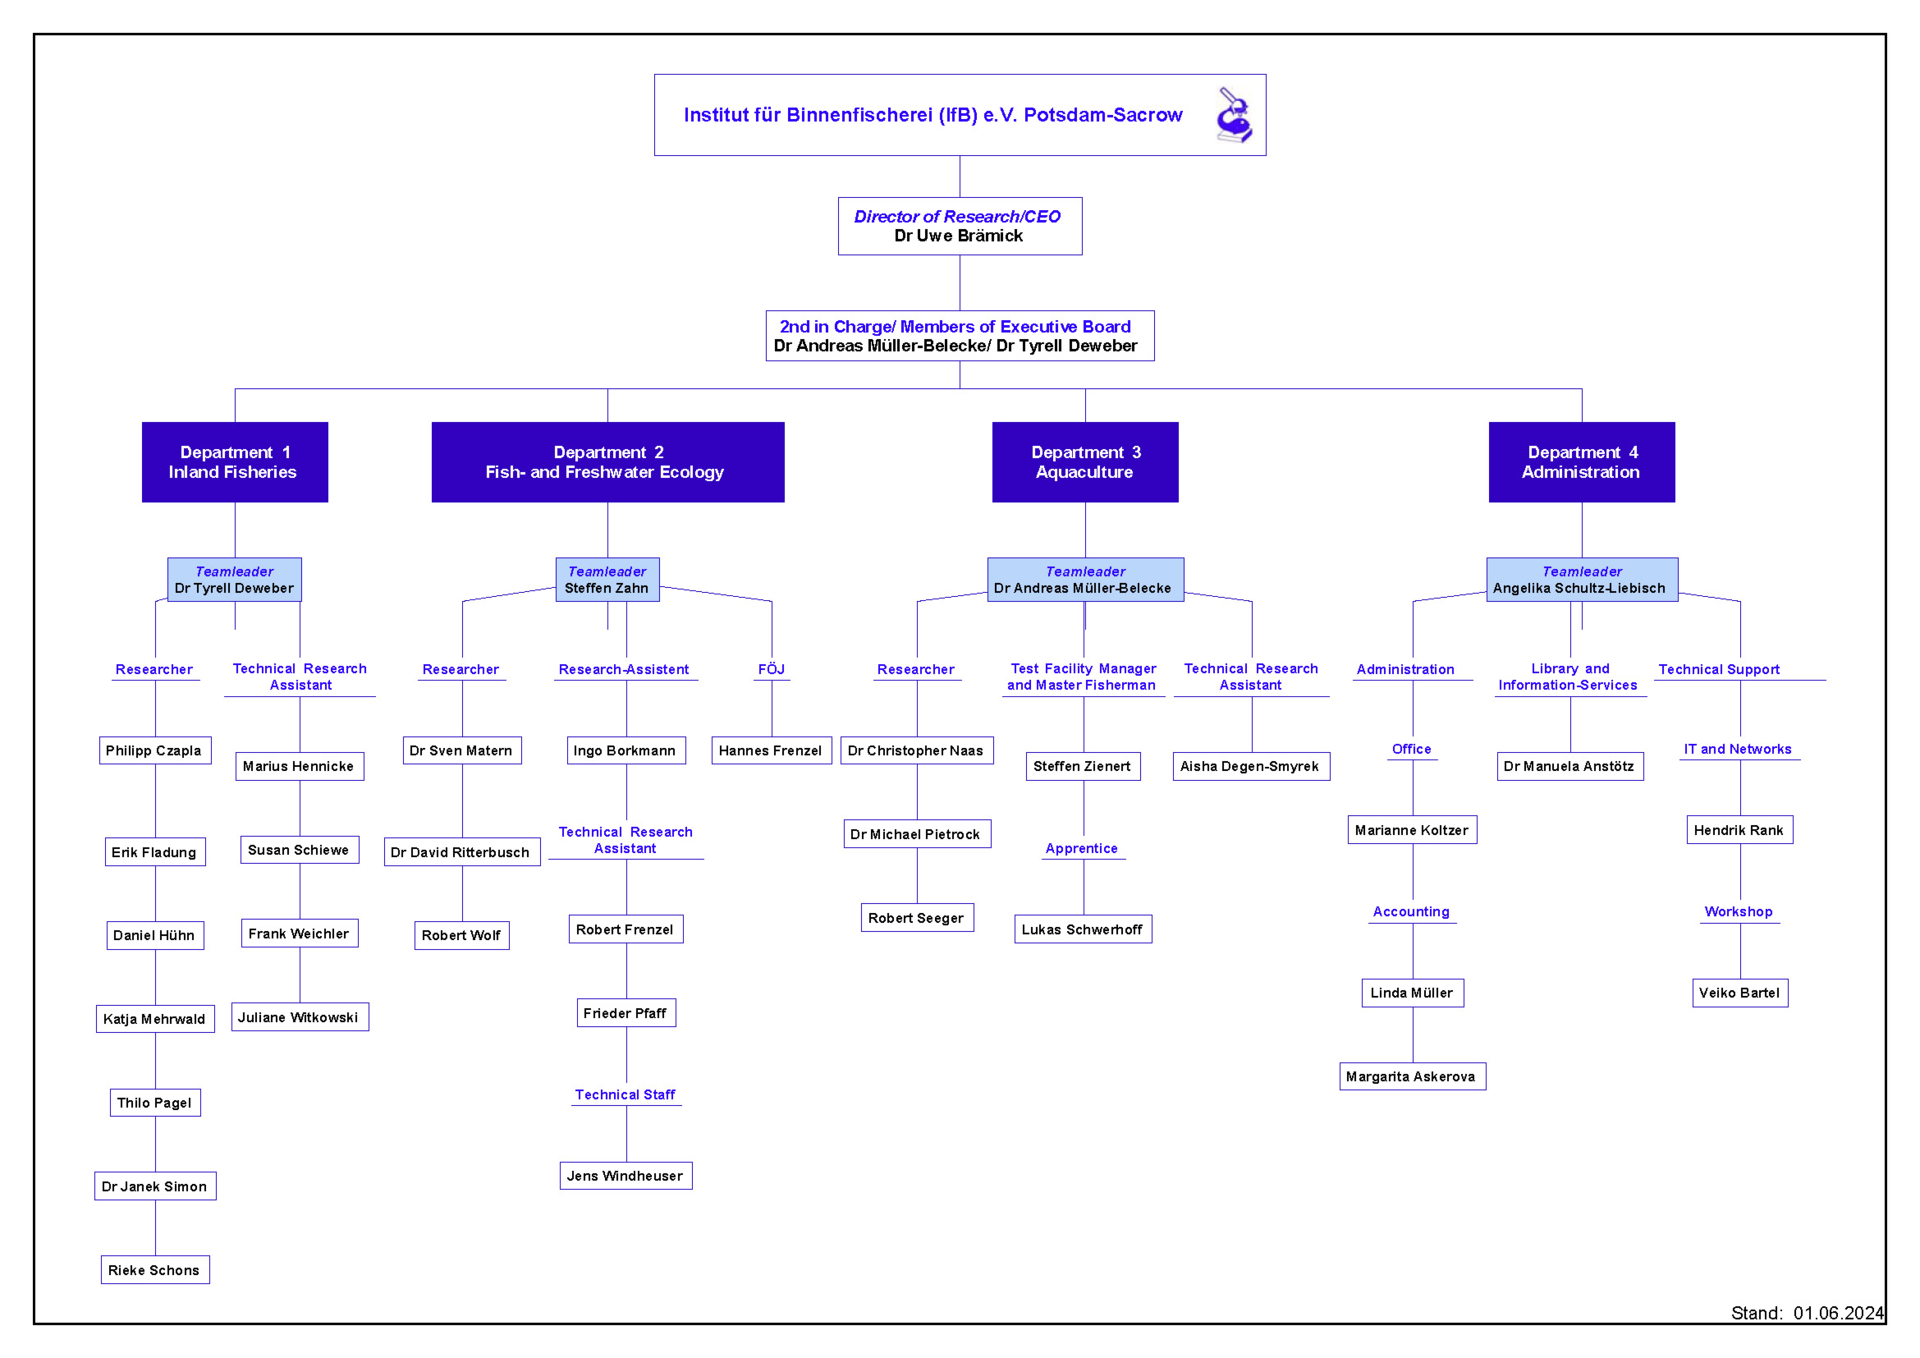 The Institute's Organisational Chart 06/2024